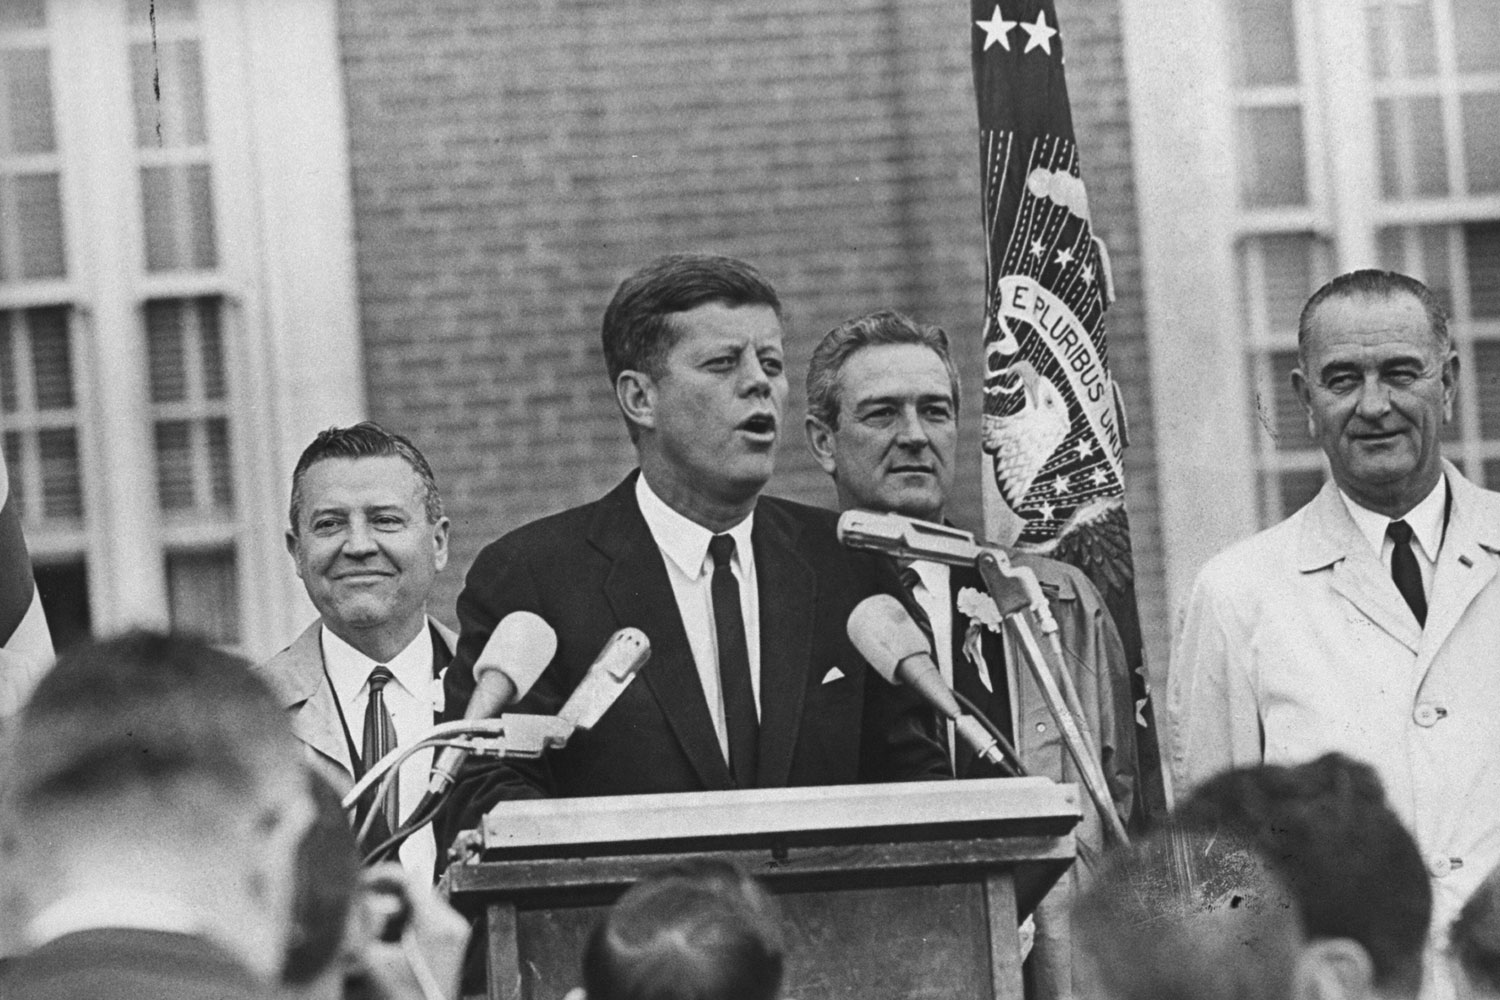 President John Kennedy delivers a brief speech outside the Hotel Texas in Fort Worth, Nov. 22, 1963, shortly before flying to Dallas.